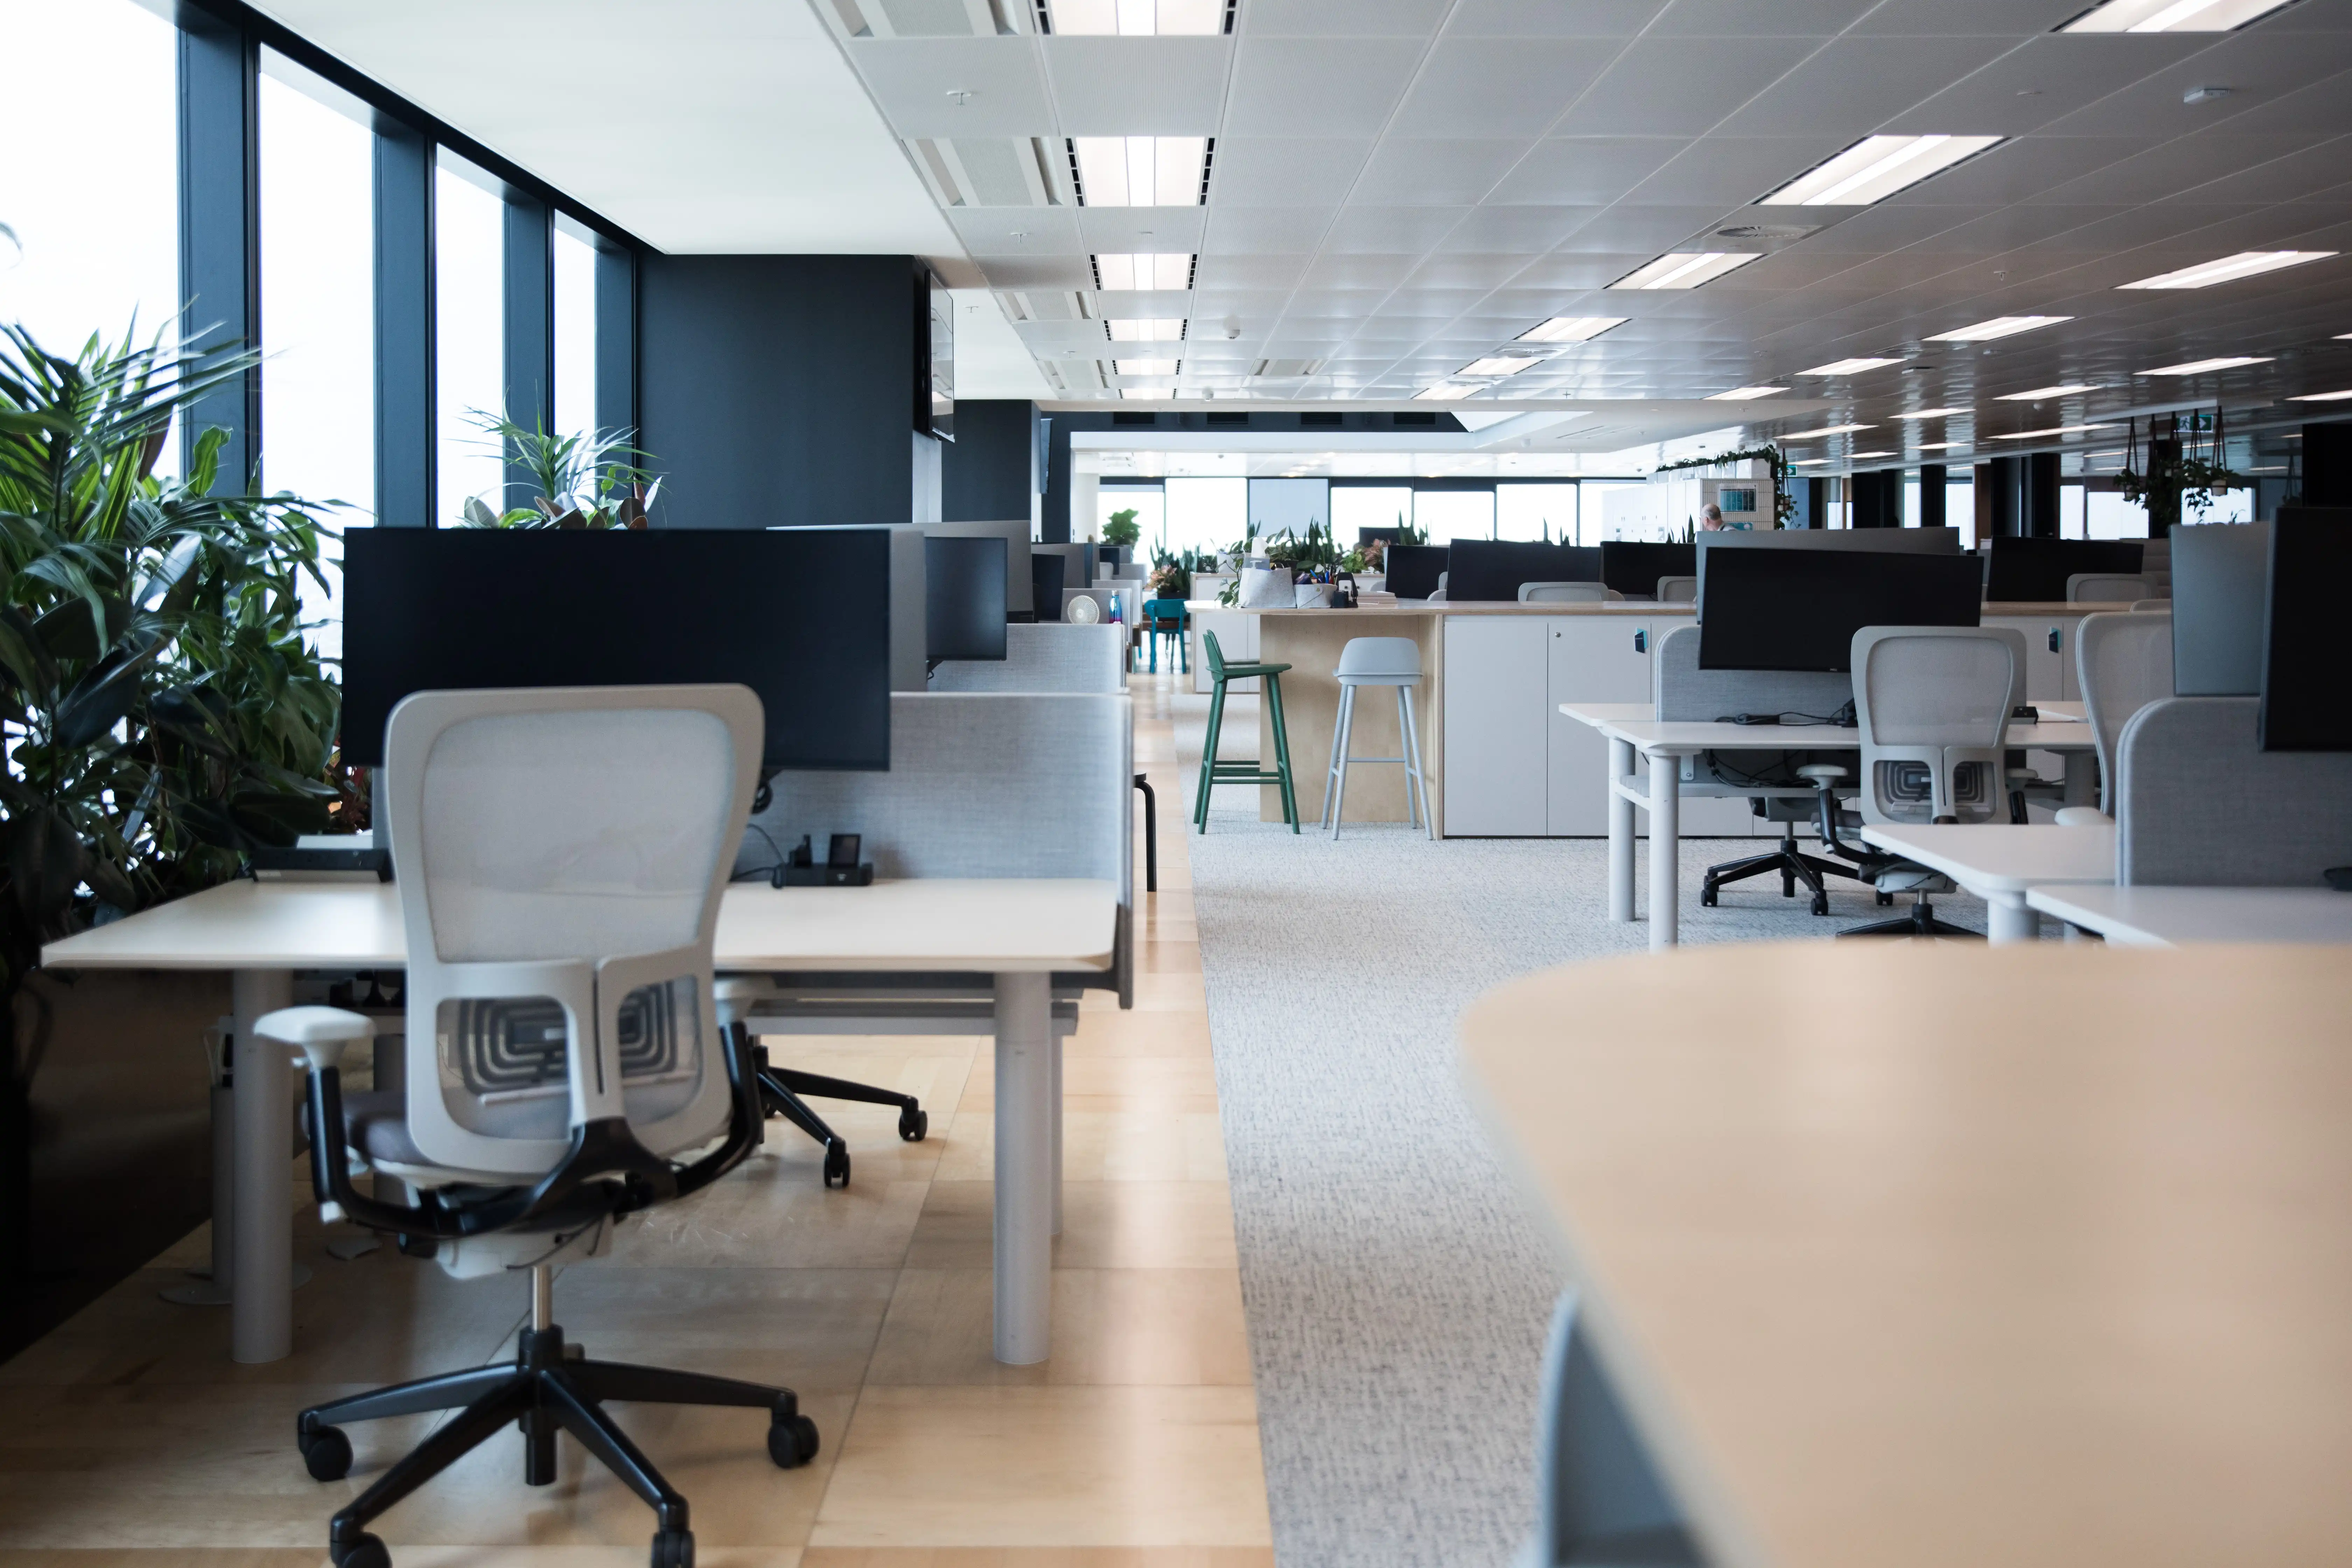 Furniture Installation Insights - Maximizing Office Space